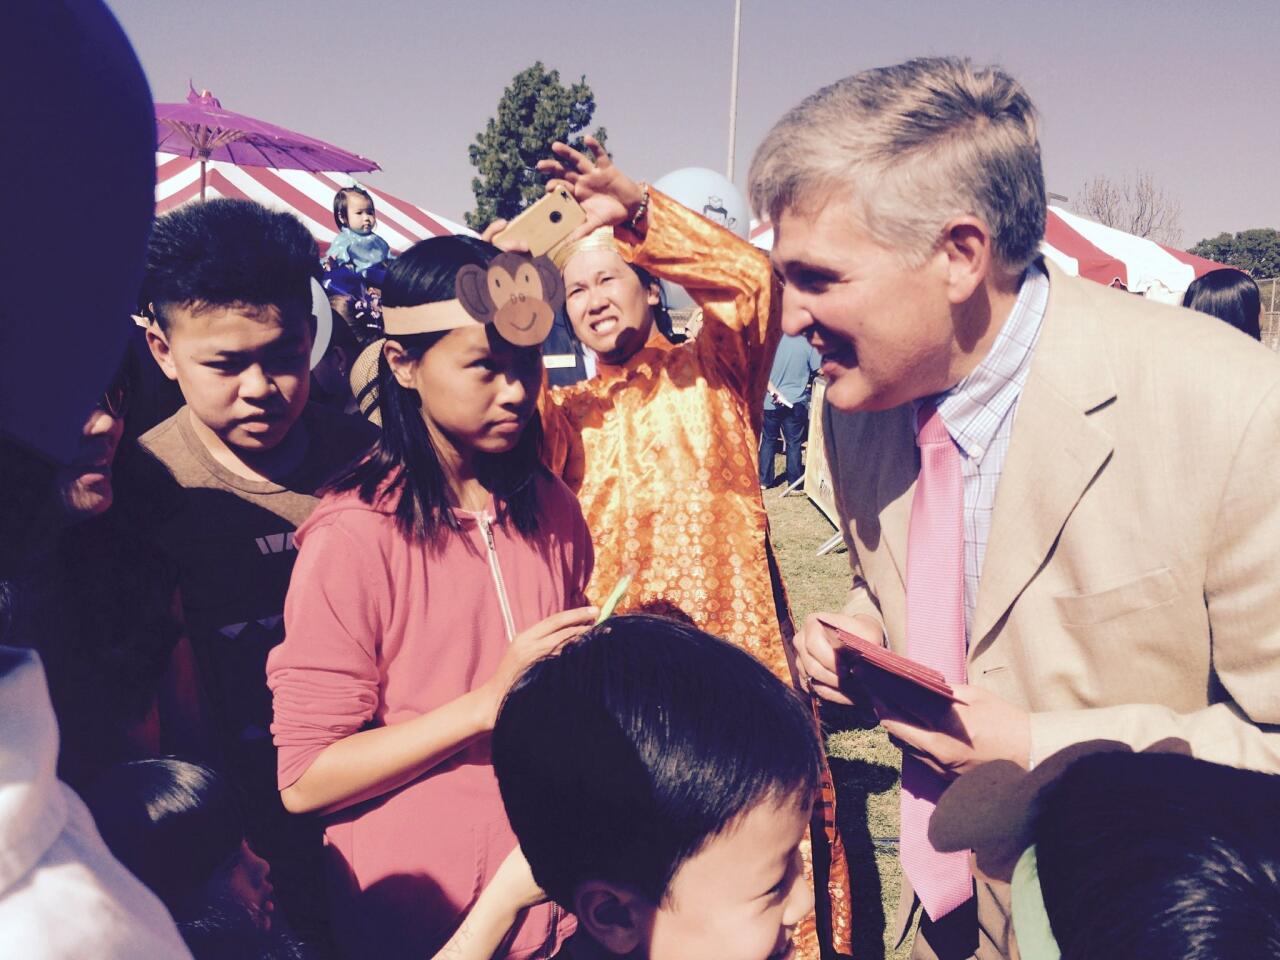 County Supervisor Dave Roberts hands out traditional red Li Xi envelopes to celebrate the Vietnamese Lunar New Year at the San Diego Tet Festival 2016.